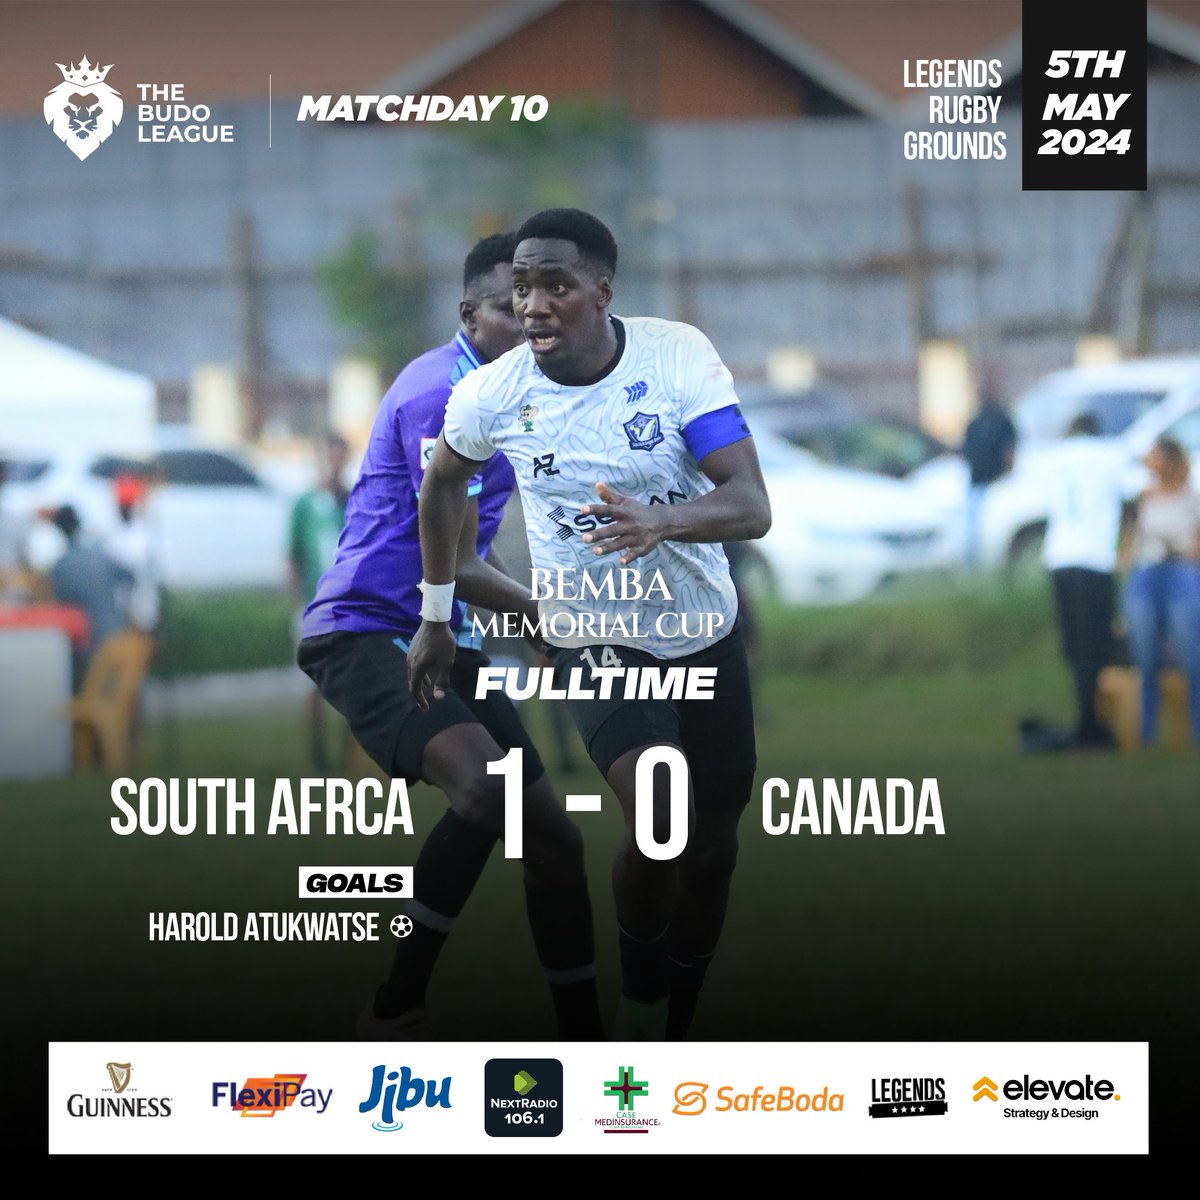 Advantage to South Africa House 🇿🇦 A late @HaroldAtukwatse goal was enough to guide Defending Champions to a 1-0 win over Canada House in #BembaMemorialCup semi final 1st leg 👏 #TBL7